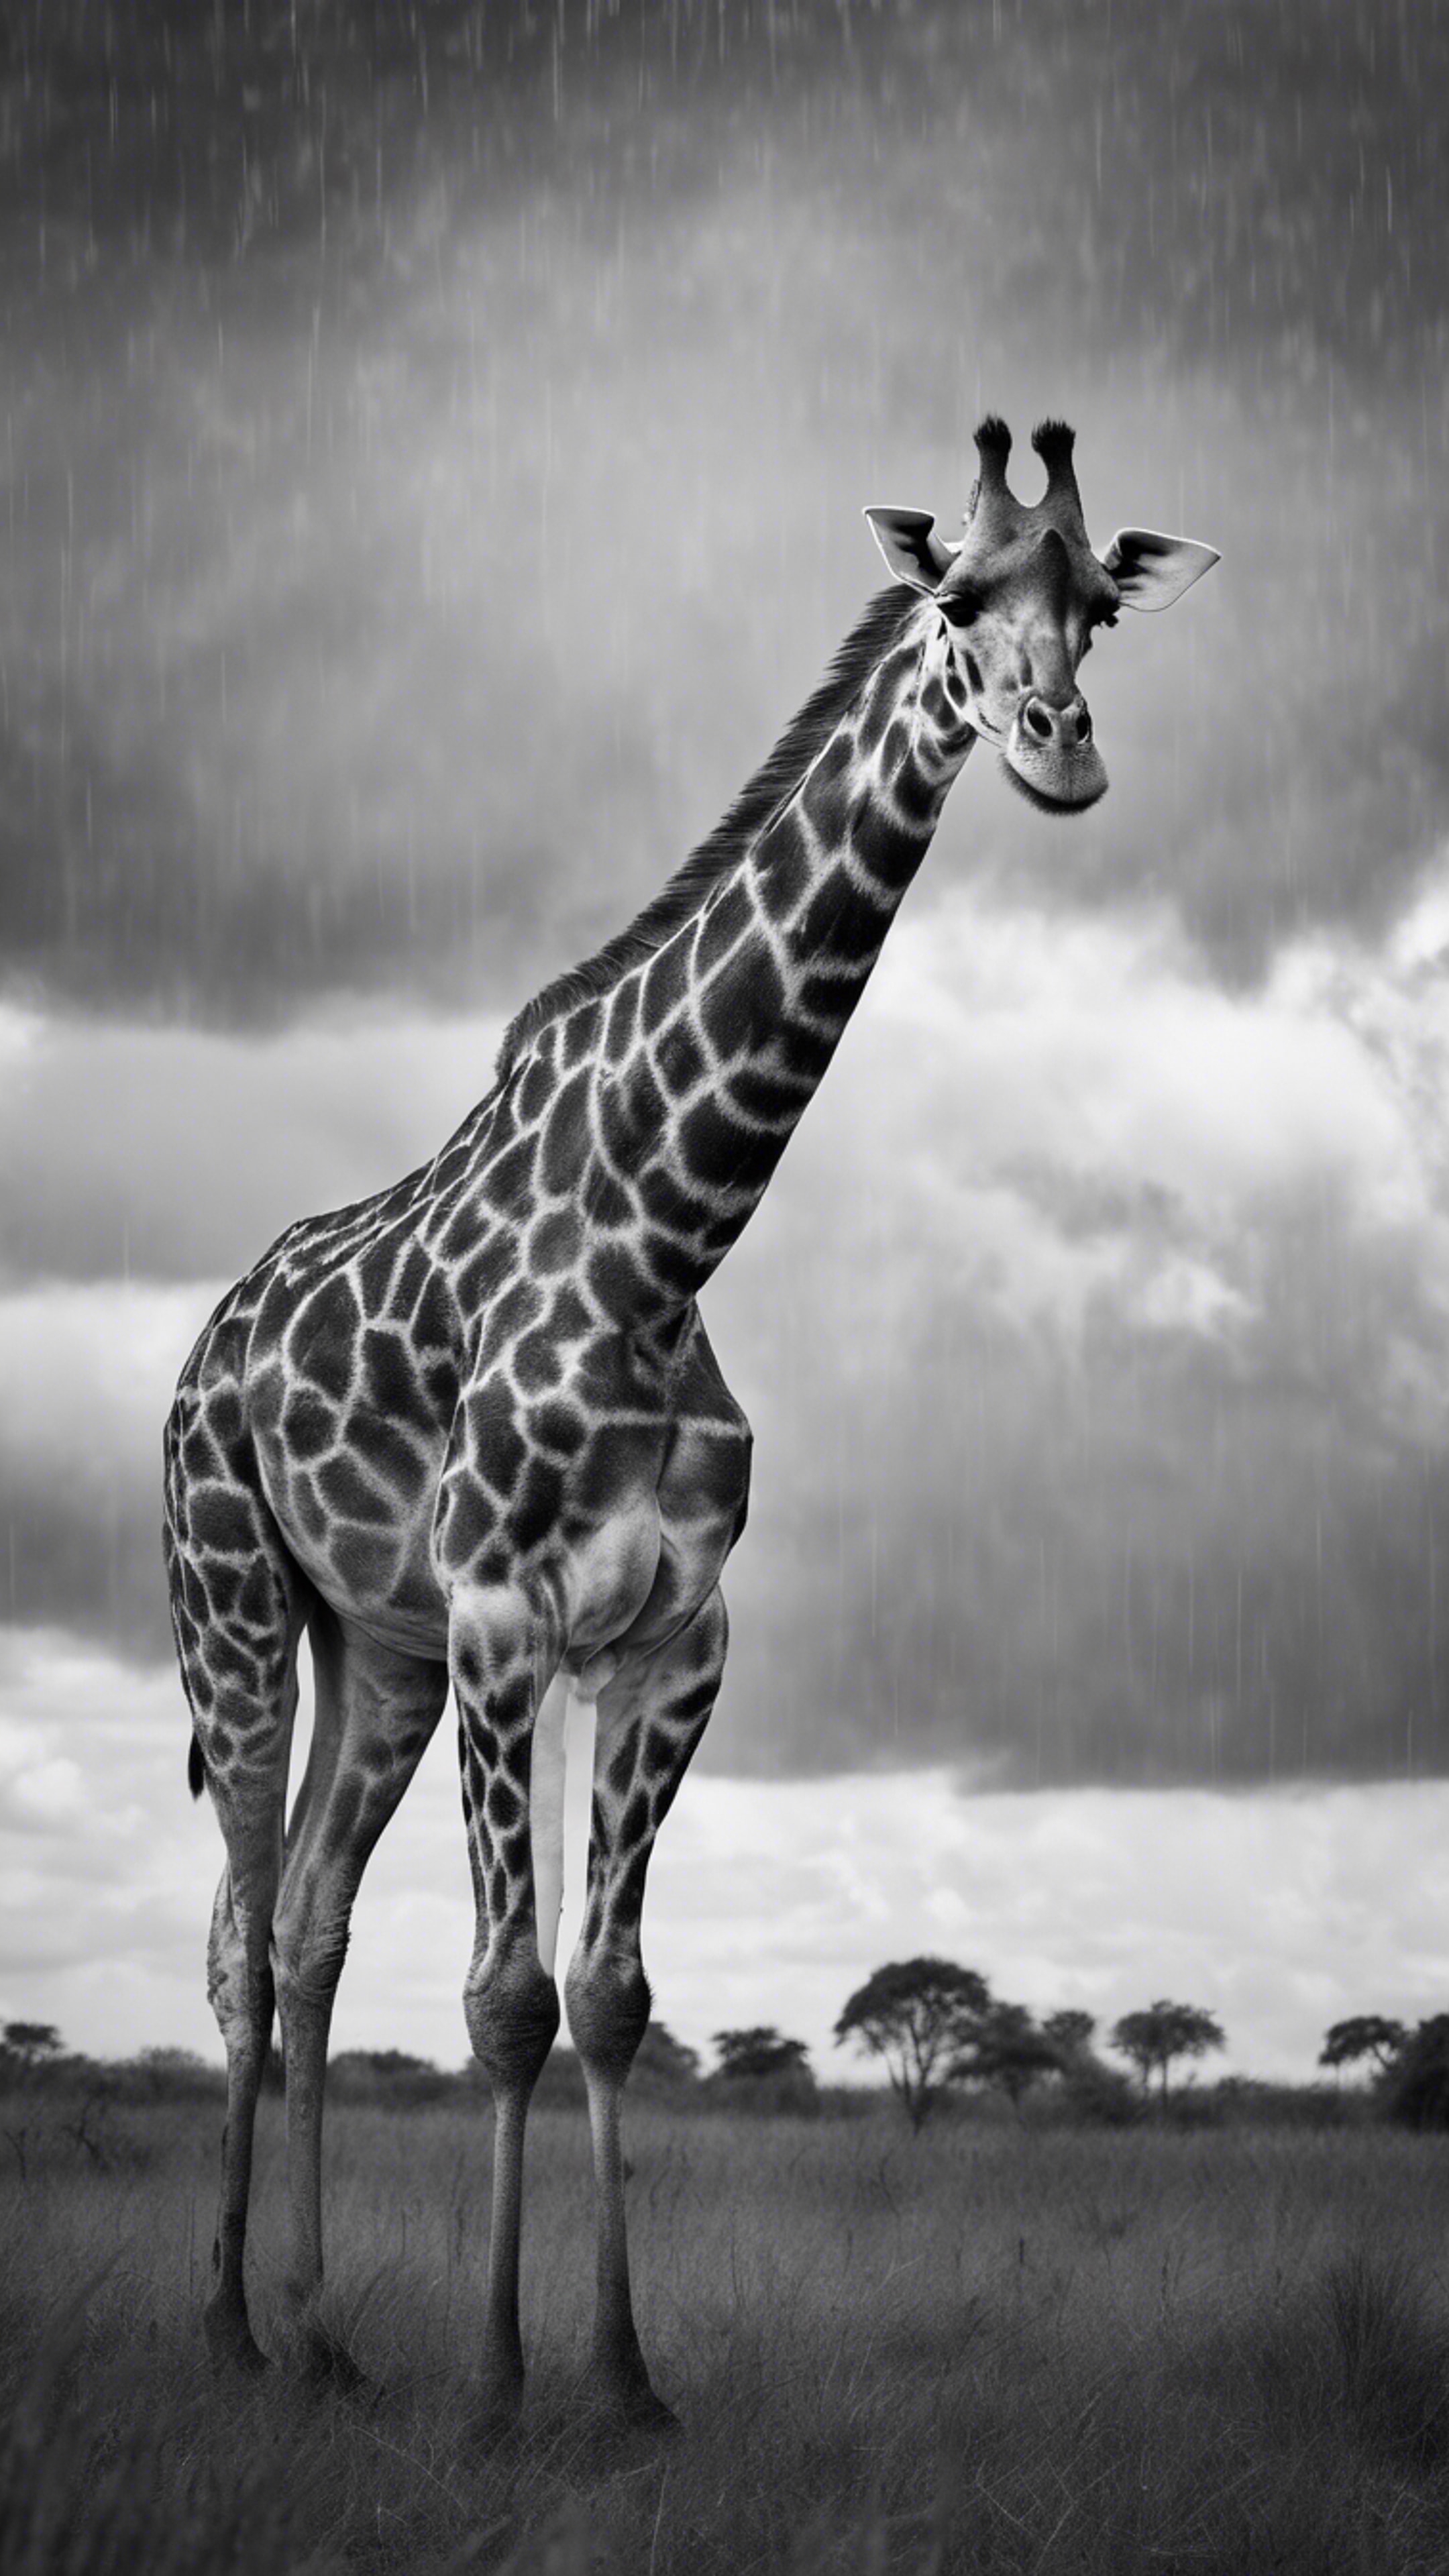 A beautifully photographed black and white image of a giraffe sauntering under rain clouds. Tapet[33f5eecce55b4c40952e]